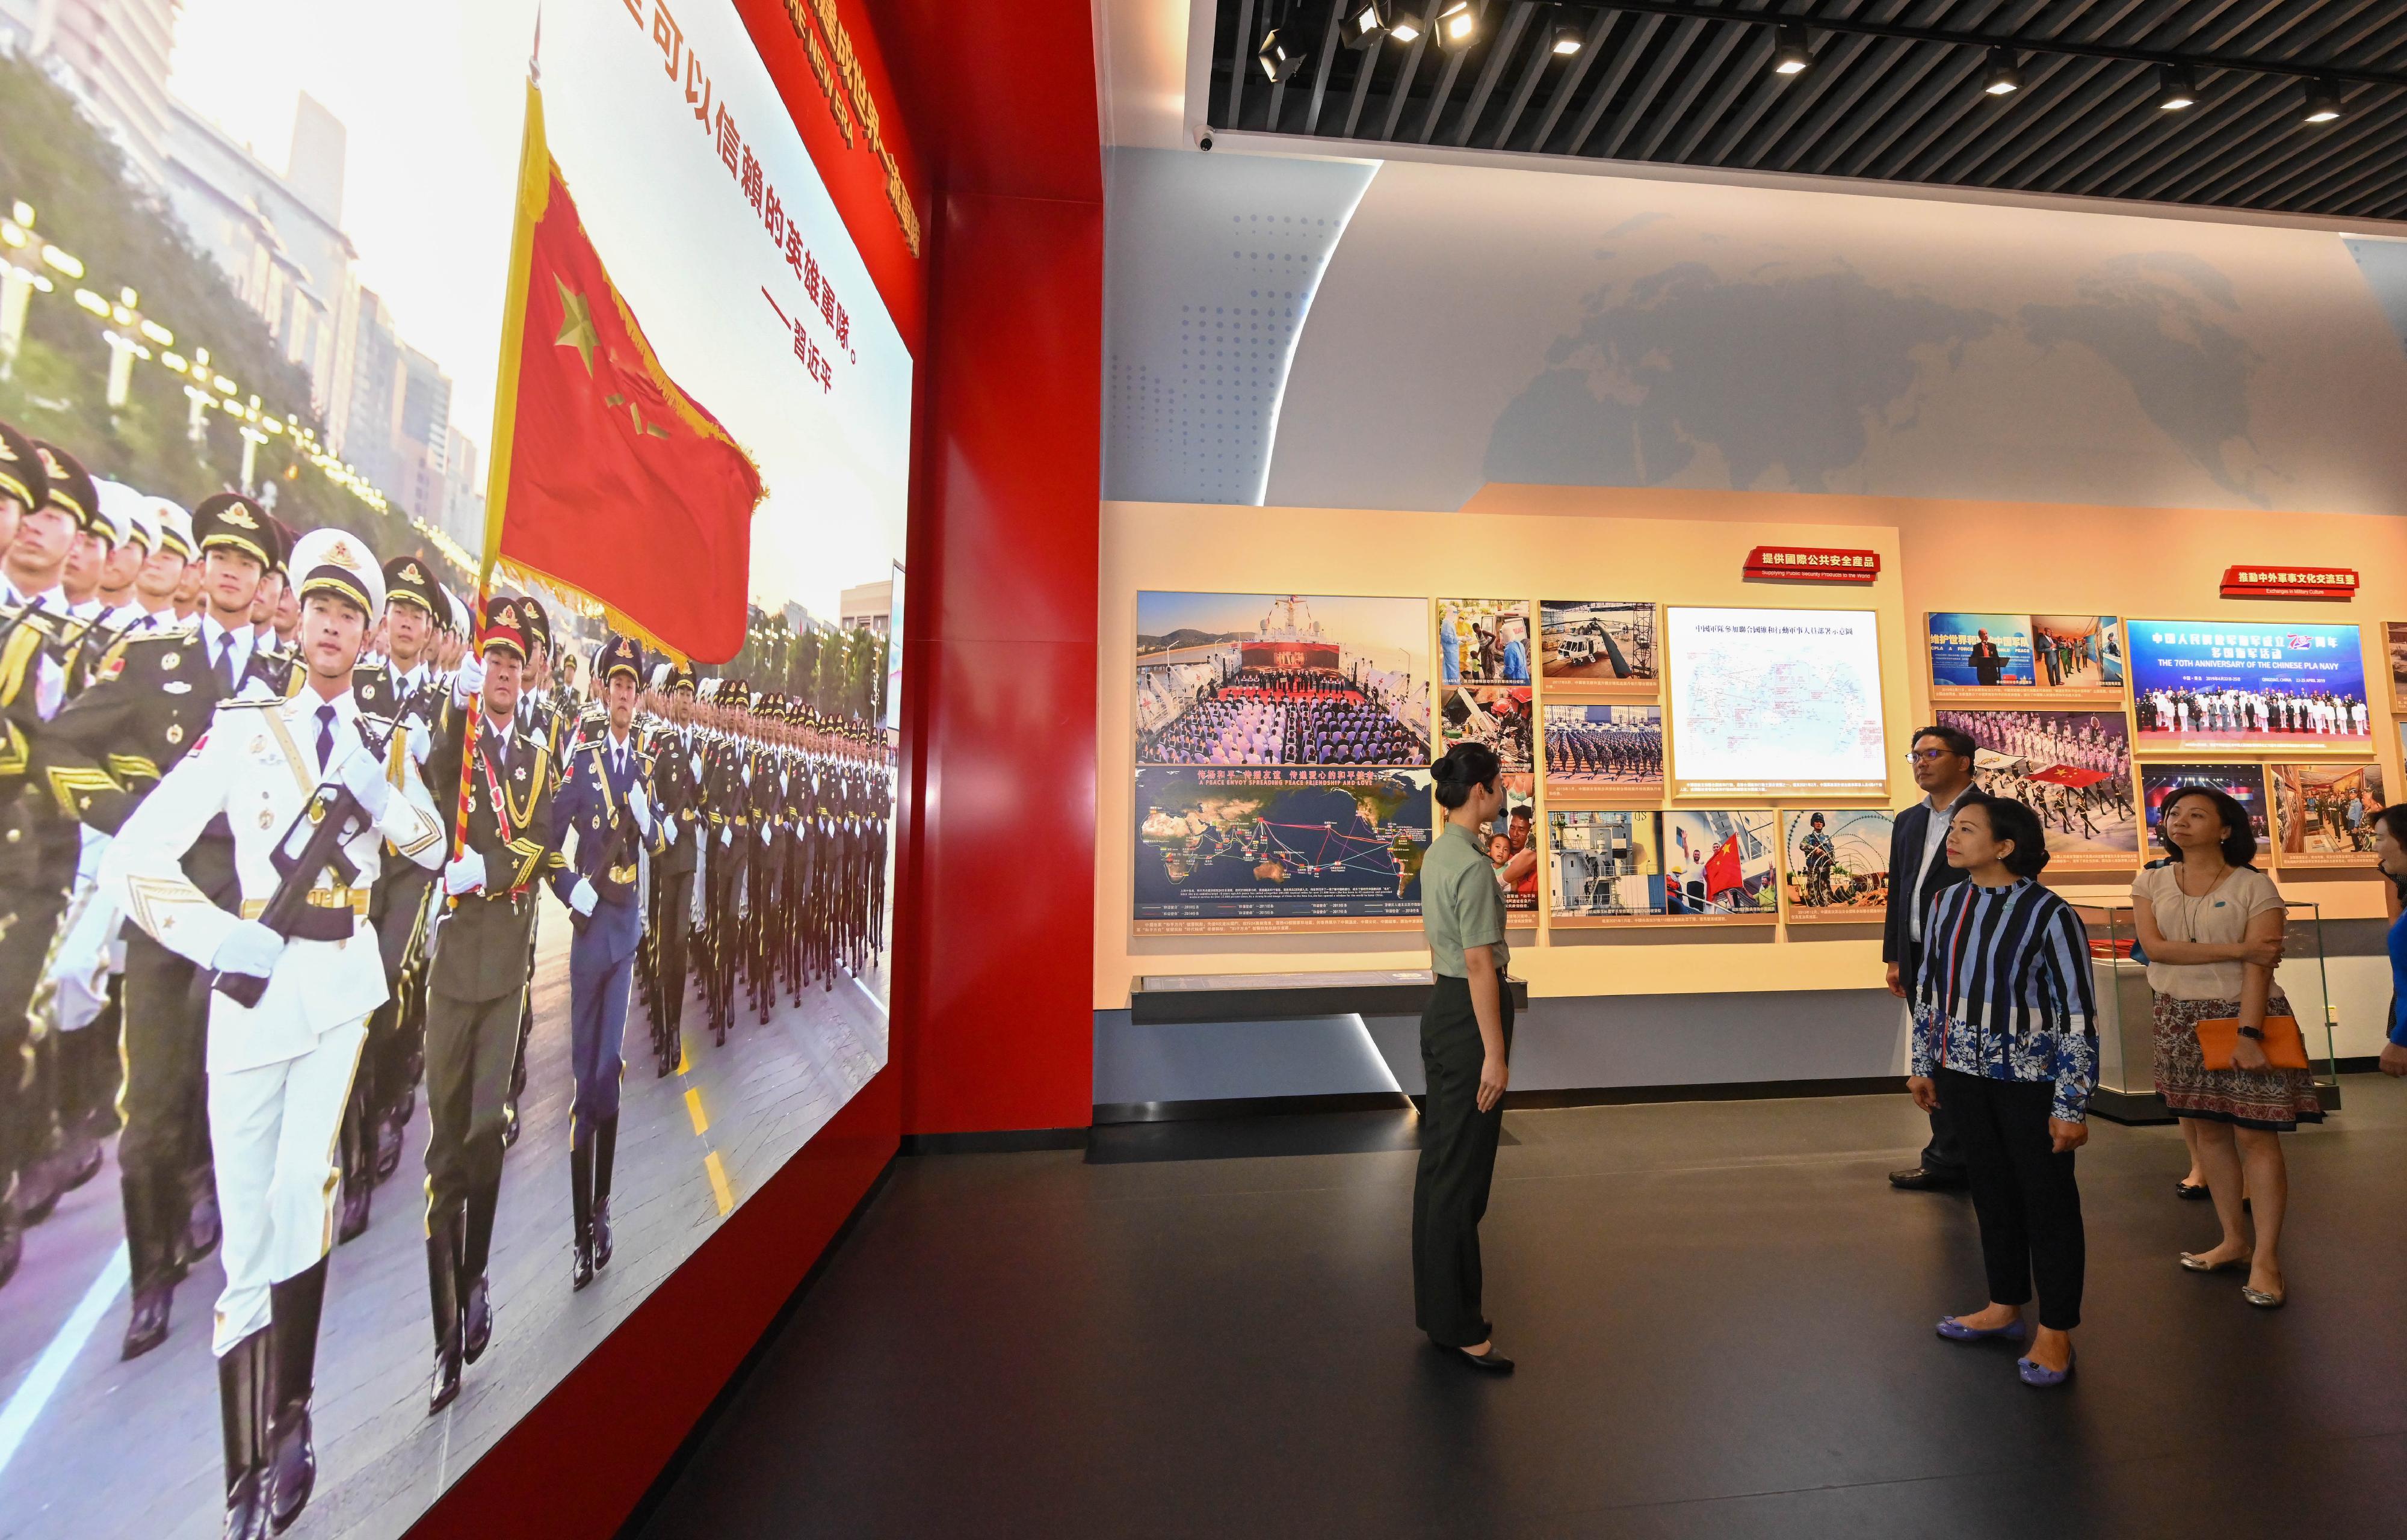 The Secretary for Home and Youth Affairs, Miss Alice Mak (second left); the Permanent Secretary for Home and Youth Affairs, Ms Shirley Lam (fourth left); and the Under Secretary for Home and Youth Affairs, Mr Clarence Leung (third left), today (July 11) visited the Chinese People's Liberation Army Hong Kong Garrison Exhibition Center at Ngong Shuen Chau Barracks, and received a briefing on the exhibits from an official of the Chinese People's Liberation Army Hong Kong Garrison.
